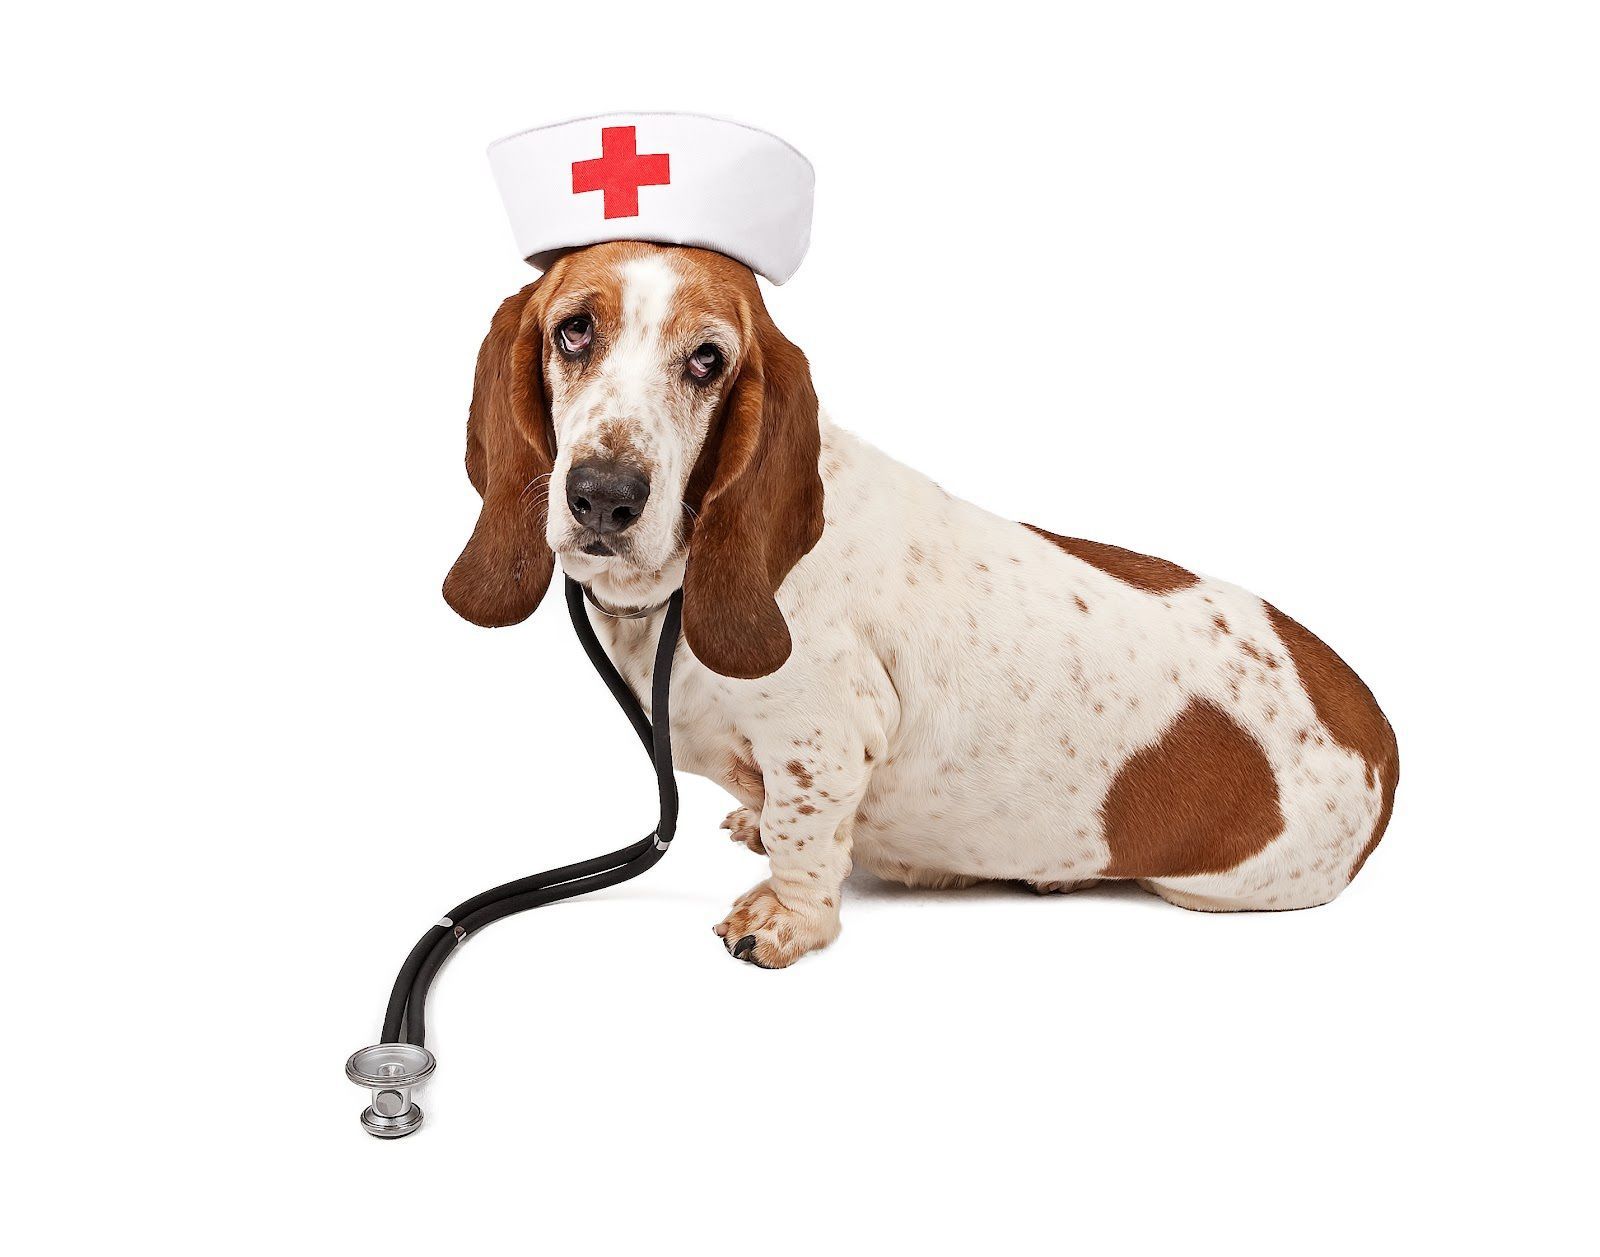 Basset hound in nurse costume wallpapers and images - wallpapers ...